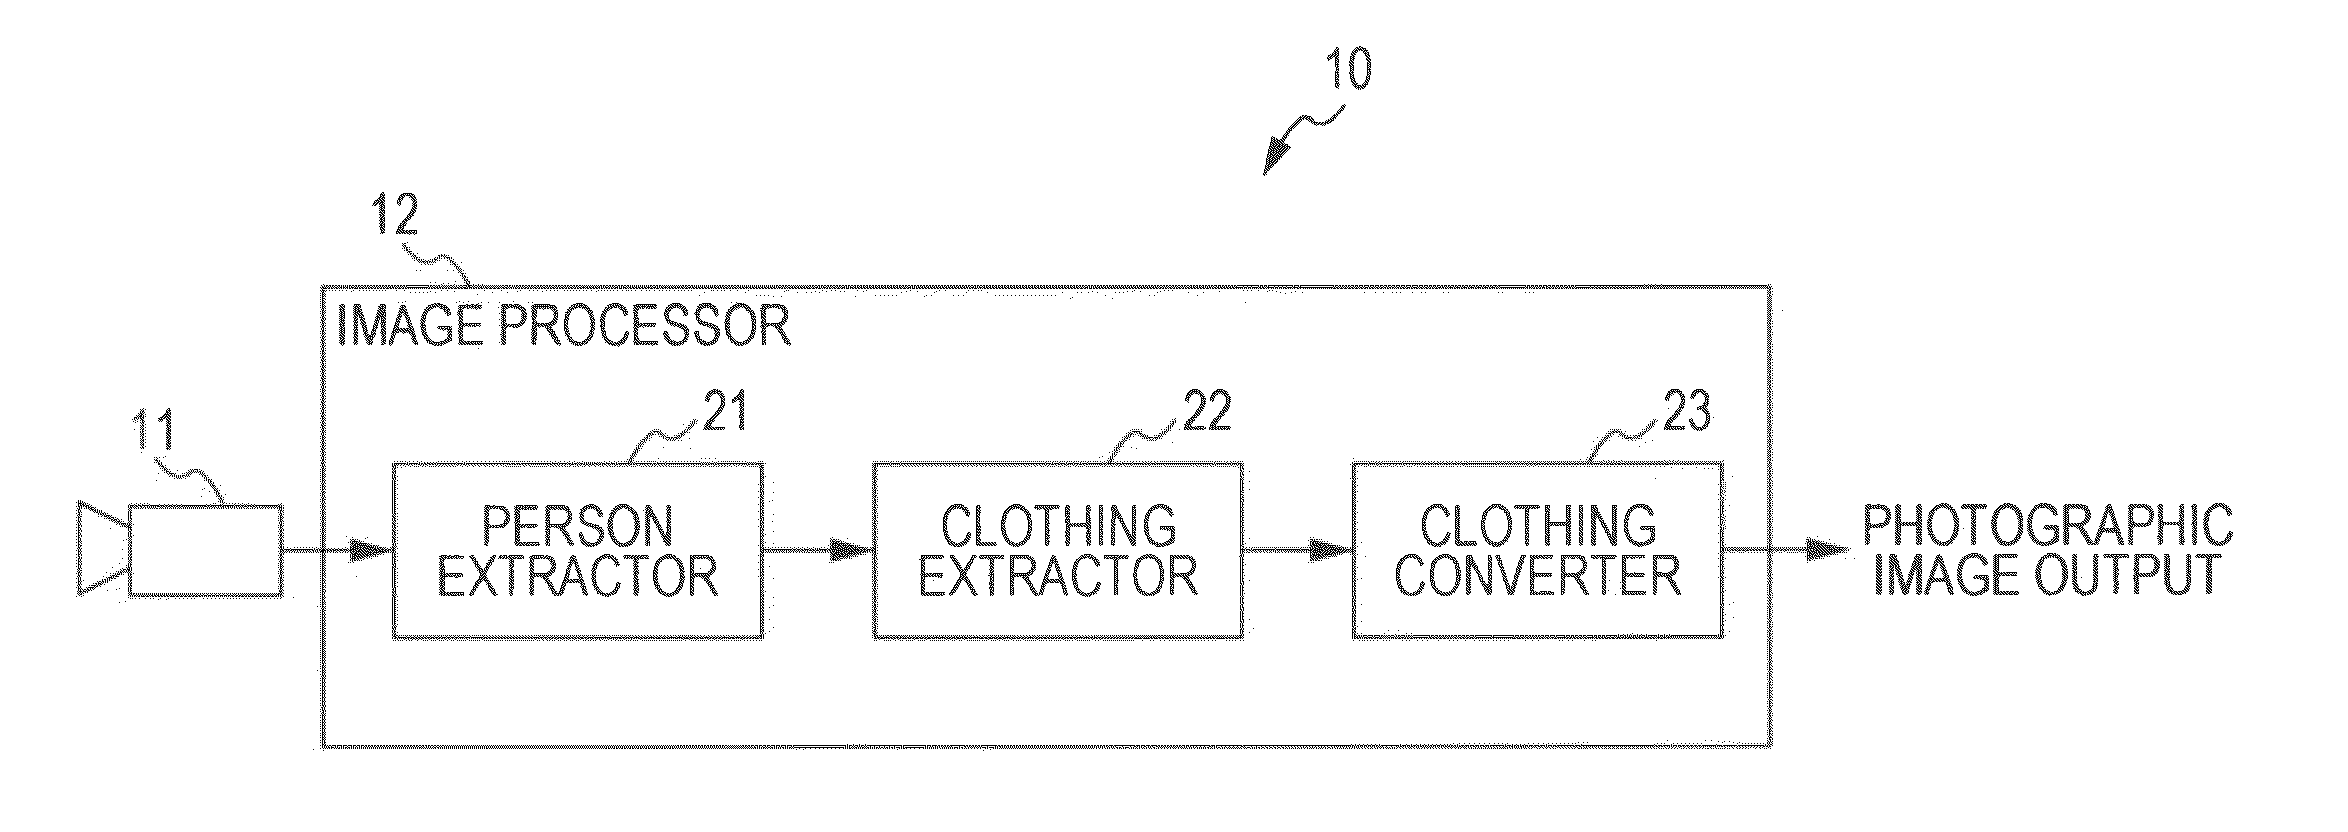 Image processing device for detecting a face or head region, a clothing region and for changing the clothing region